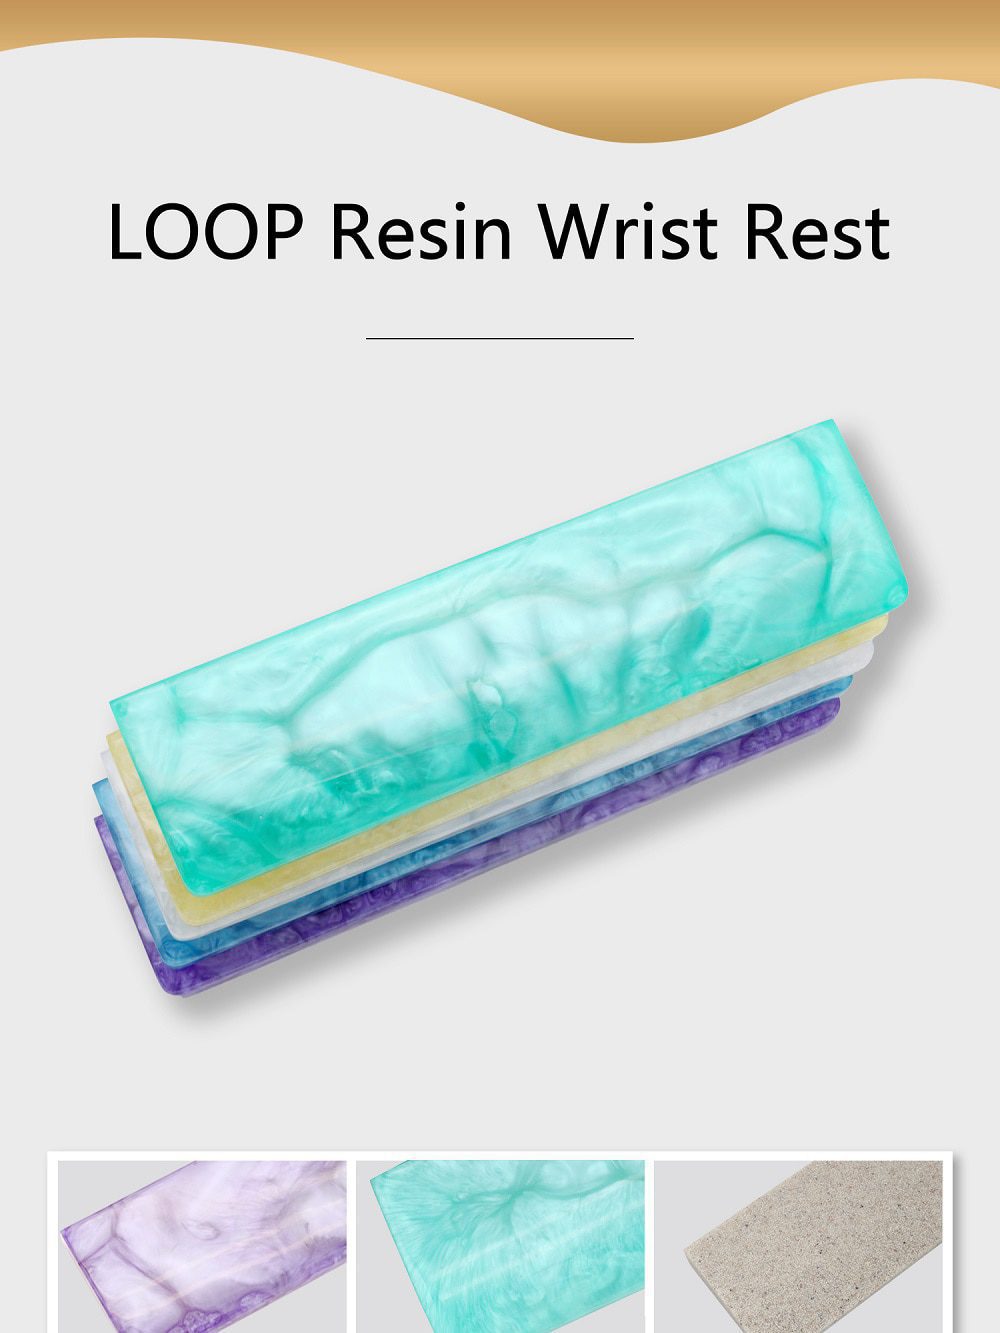 LOOP Resin Wrist Rest Handmade Wrist with Rubber feet for mechanical keyboards gh60 xd60 xd64 60% Poker 87